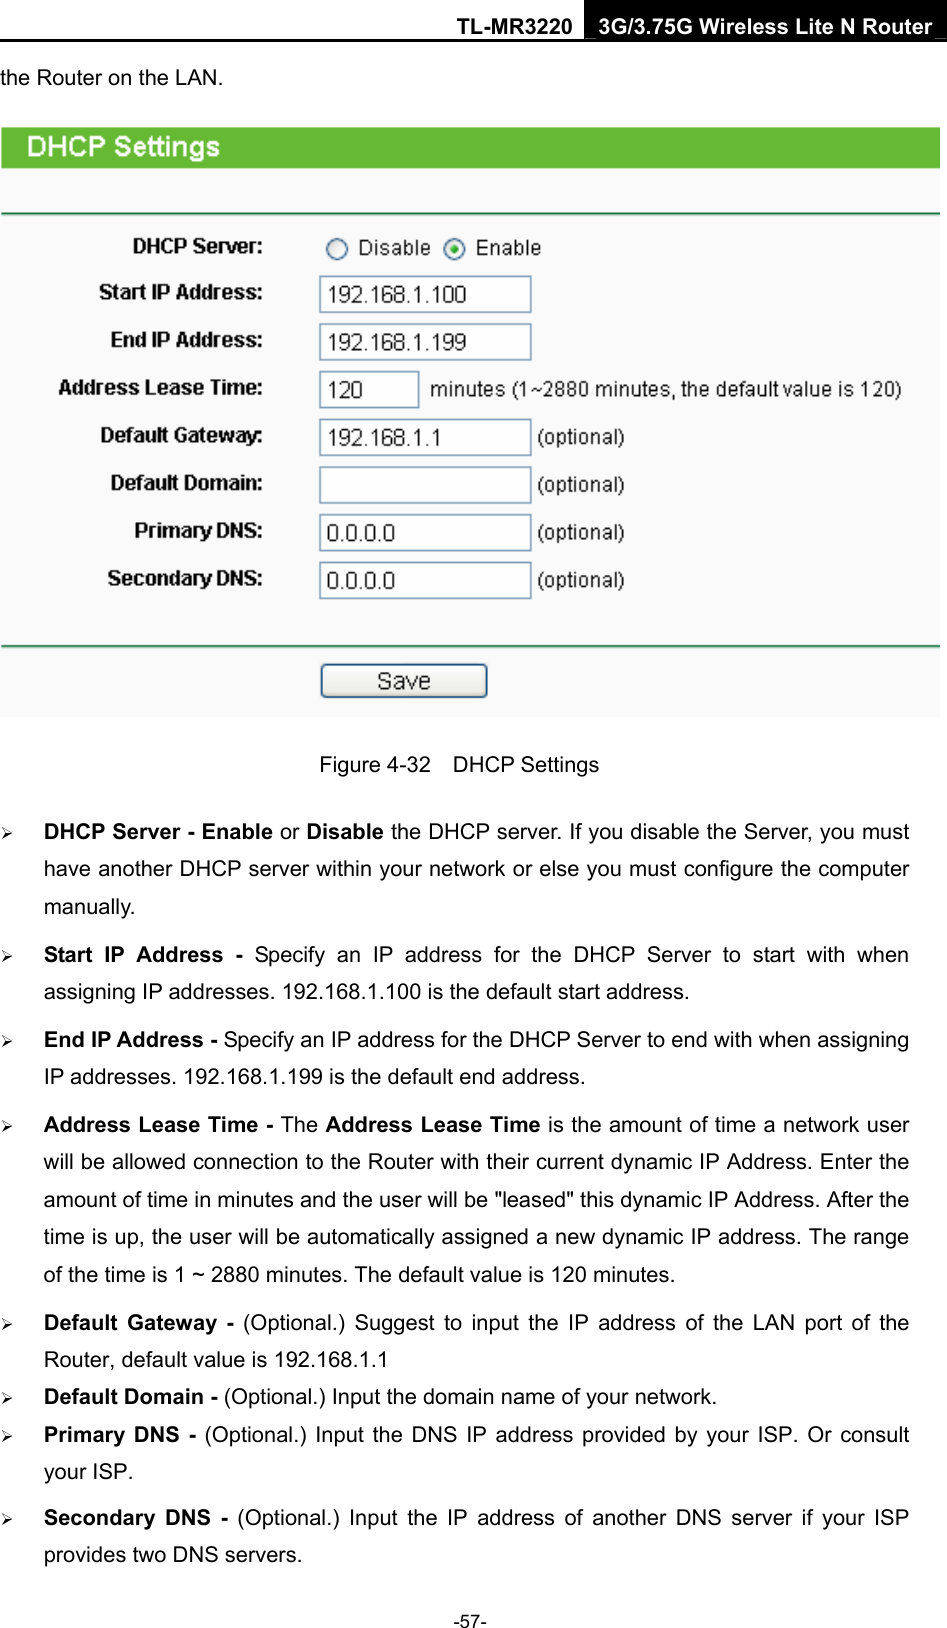 TL-MR3220 3G/3.75G Wireless Lite N Router -57- the Router on the LAN.    Figure 4-32  DHCP Settings ¾ DHCP Server - Enable or Disable the DHCP server. If you disable the Server, you must have another DHCP server within your network or else you must configure the computer manually. ¾ Start IP Address - Specify an IP address for the DHCP Server to start with when assigning IP addresses. 192.168.1.100 is the default start address. ¾ End IP Address - Specify an IP address for the DHCP Server to end with when assigning IP addresses. 192.168.1.199 is the default end address. ¾ Address Lease Time - The Address Lease Time is the amount of time a network user will be allowed connection to the Router with their current dynamic IP Address. Enter the amount of time in minutes and the user will be &quot;leased&quot; this dynamic IP Address. After the time is up, the user will be automatically assigned a new dynamic IP address. The range of the time is 1 ~ 2880 minutes. The default value is 120 minutes. ¾ Default Gateway - (Optional.) Suggest to input the IP address of the LAN port of the Router, default value is 192.168.1.1 ¾ Default Domain - (Optional.) Input the domain name of your network. ¾ Primary DNS - (Optional.) Input the DNS IP address provided by your ISP. Or consult your ISP. ¾ Secondary DNS - (Optional.) Input the IP address of another DNS server if your ISP provides two DNS servers. 